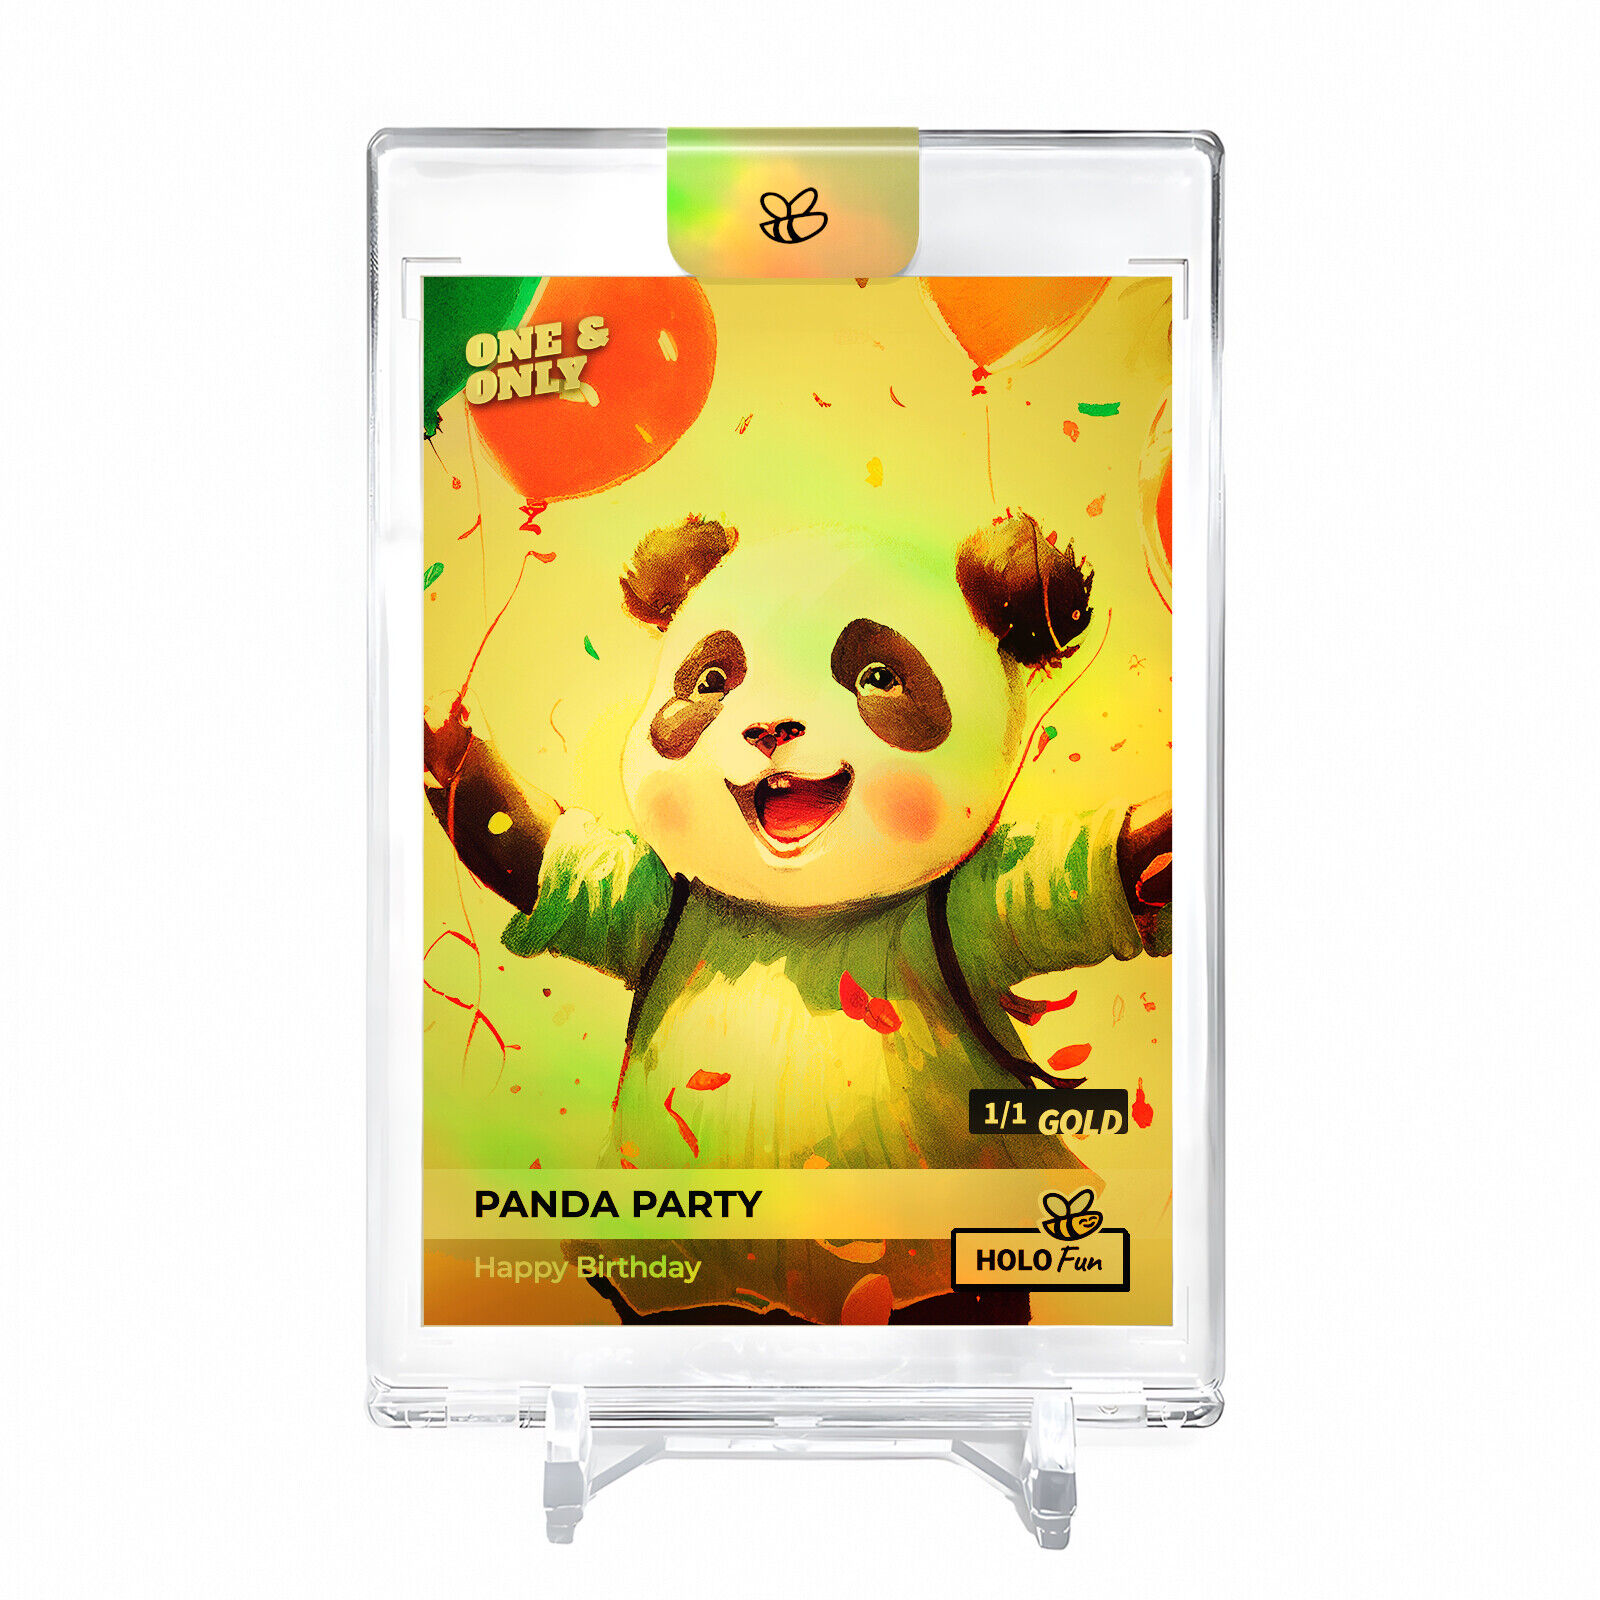 PANDA PARTY Birthday Panda Art Card #PPBR AWESOME *One & Only* Encased Gold 1/1